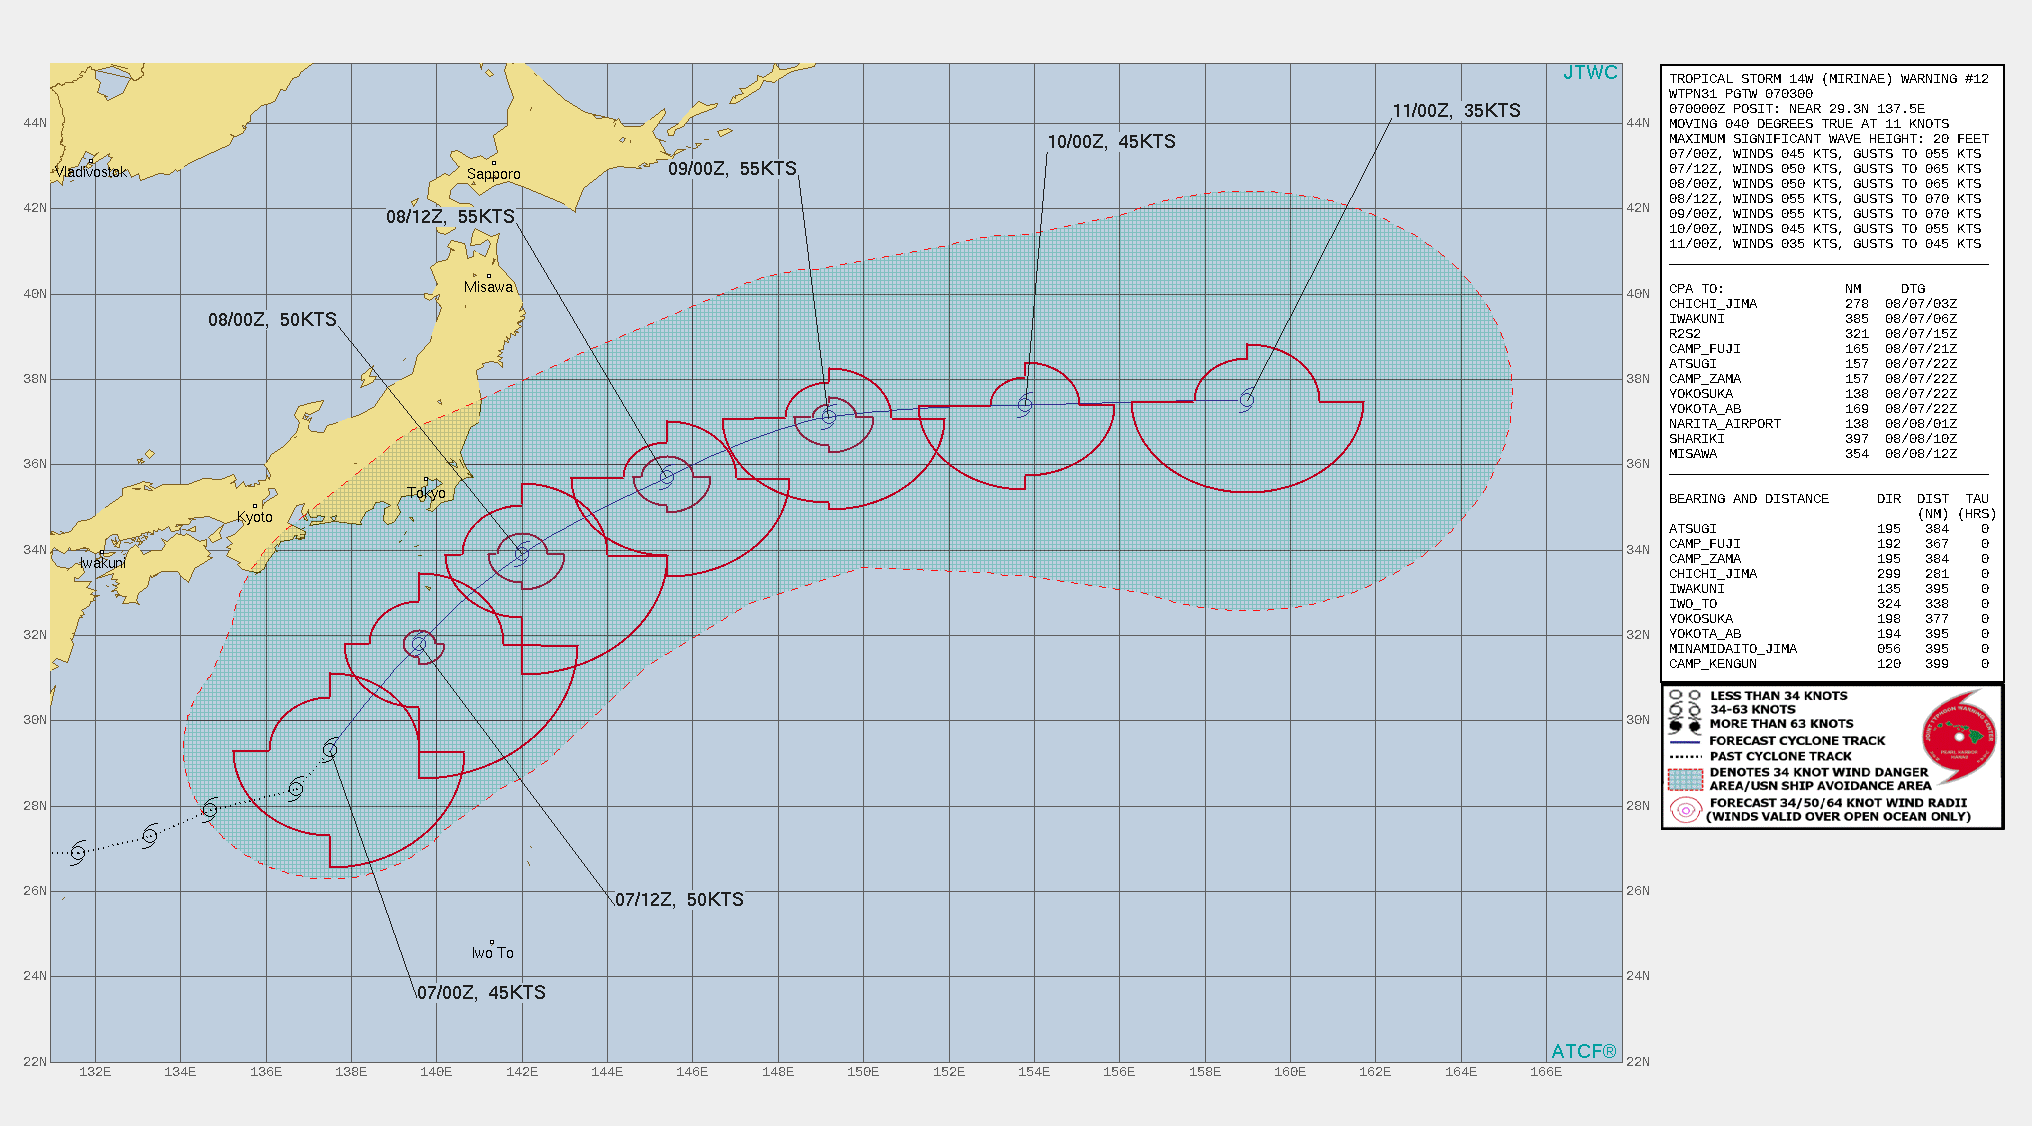 TS 14W(MIRINAE). WARNING 12 ISSUED AT 07/03UTC.THERE ARE NO SIGNIFICANT CHANGES TO THE FORECAST FROM THE PREVIOUS WARNING.  FORECAST DISCUSSION: TROPICAL STORM 14W (MIRINAE) CONTINUES TO TRACK TOWARD THE NORTHEAST. THE MAJOR SHORTWAVE TROUGH TO THE WEST  HAS DEGRADED STRUCTURE, AND DRIER AIR HAS WRAPPED INSIDE THE SYSTEM.  THE SYSTEM IS FORECAST TO ACCELERATE NORTHEASTWARD THROUGH 24H,  THEN TURN EASTWARD BY 36H AS IT MERGES INTO THE STRONG EAST-WEST  ORIENTED BAROCLINIC ZONE NEAR THE 38TH PARALLEL. THEREAFTER, THE  SYSTEM WILL ENCOUNTER COOLER SSTS AND VERTICAL WIND SHEAR WILL BEGIN TO DOMINATE THE  OUTFLOW ALOFT, LEADING TO STEADY WEAKENING THROUGH THE REMAINDER OF  THE FORECAST PERIOD. THE SYSTEM IS EXPECTED TO BEGIN EXTRA-TROPICAL  TRANSITION (ETT) BY 72H AND, AS IT MOVES UNDER STRONG MID- LATITUDE WESTERLIES AND DEVELOPS FRONTAL CHARACTERISTICS, WILL  COMPLETE ETT NO LATER THAN 96H.